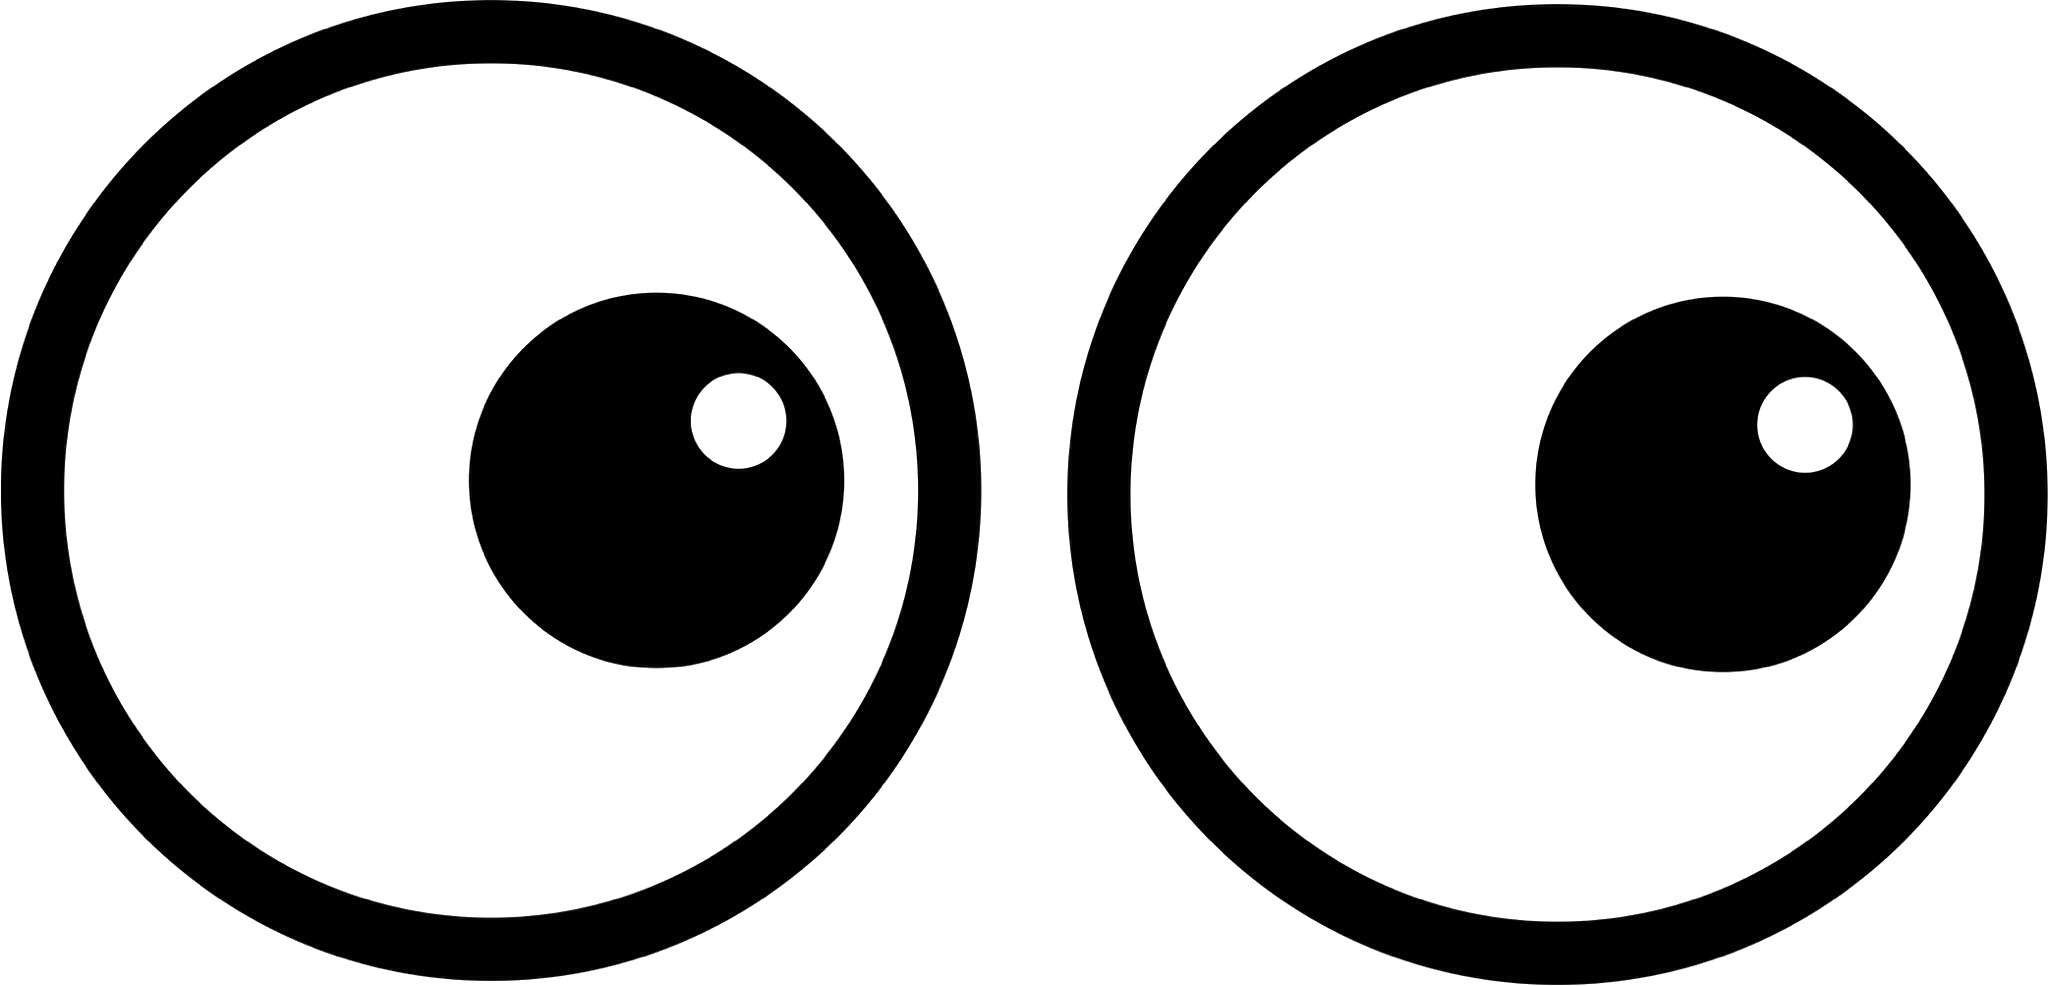 A Black And White Image Of A Pair Of Circles